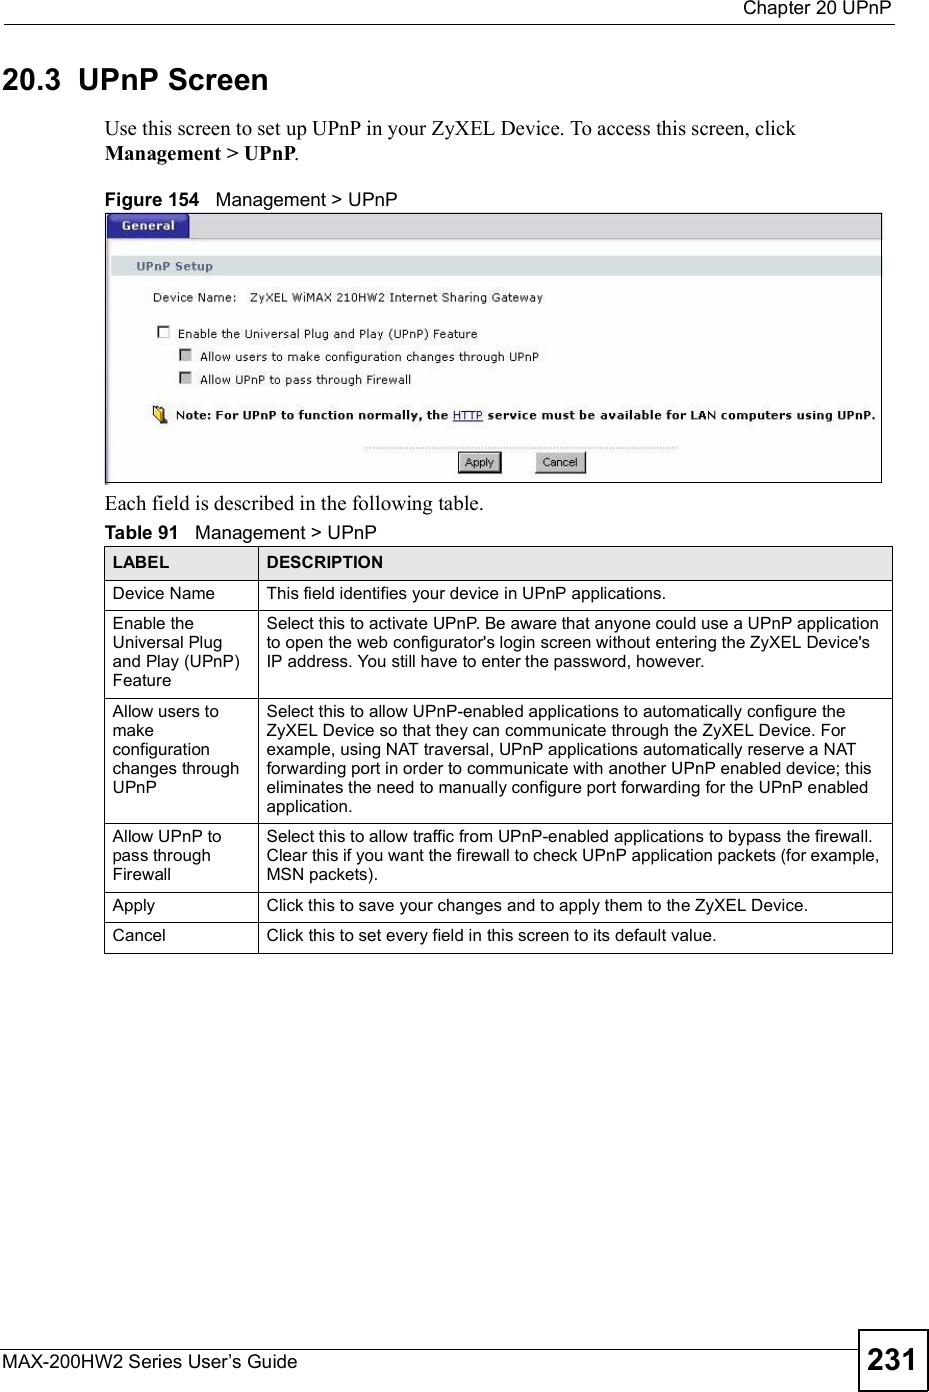  Chapter 20UPnPMAX-200HW2 Series User s Guide 23120.3  UPnP ScreenUse this screen to set up UPnP in your ZyXEL Device. To access this screen, click Management &gt; UPnP.Figure 154   Management &gt; UPnPEach field is described in the following table.Table 91   Management &gt; UPnPLABEL DESCRIPTIONDevice Name This field identifies your device in UPnP applications.Enable the Universal Plug and Play (UPnP) Feature Select this to activate UPnP. Be aware that anyone could use a UPnP application to open the web configurator&apos;s login screen without entering the ZyXEL Device&apos;s IP address. You still have to enter the password, however.Allow users to make configuration changes through UPnPSelect this to allow UPnP-enabled applications to automatically configure the ZyXEL Device so that they can communicate through the ZyXEL Device. For example, using NAT traversal, UPnP applications automatically reserve a NAT forwarding port in order to communicate with another UPnP enabled device; this eliminates the need to manually configure port forwarding for the UPnP enabled application. Allow UPnP to pass through FirewallSelect this to allow traffic from UPnP-enabled applications to bypass the firewall. Clear this if you want the firewall to check UPnP application packets (for example, MSN packets).Apply Click this to save your changes and to apply them to the ZyXEL Device.Cancel Click this to set every field in this screen to its default value.